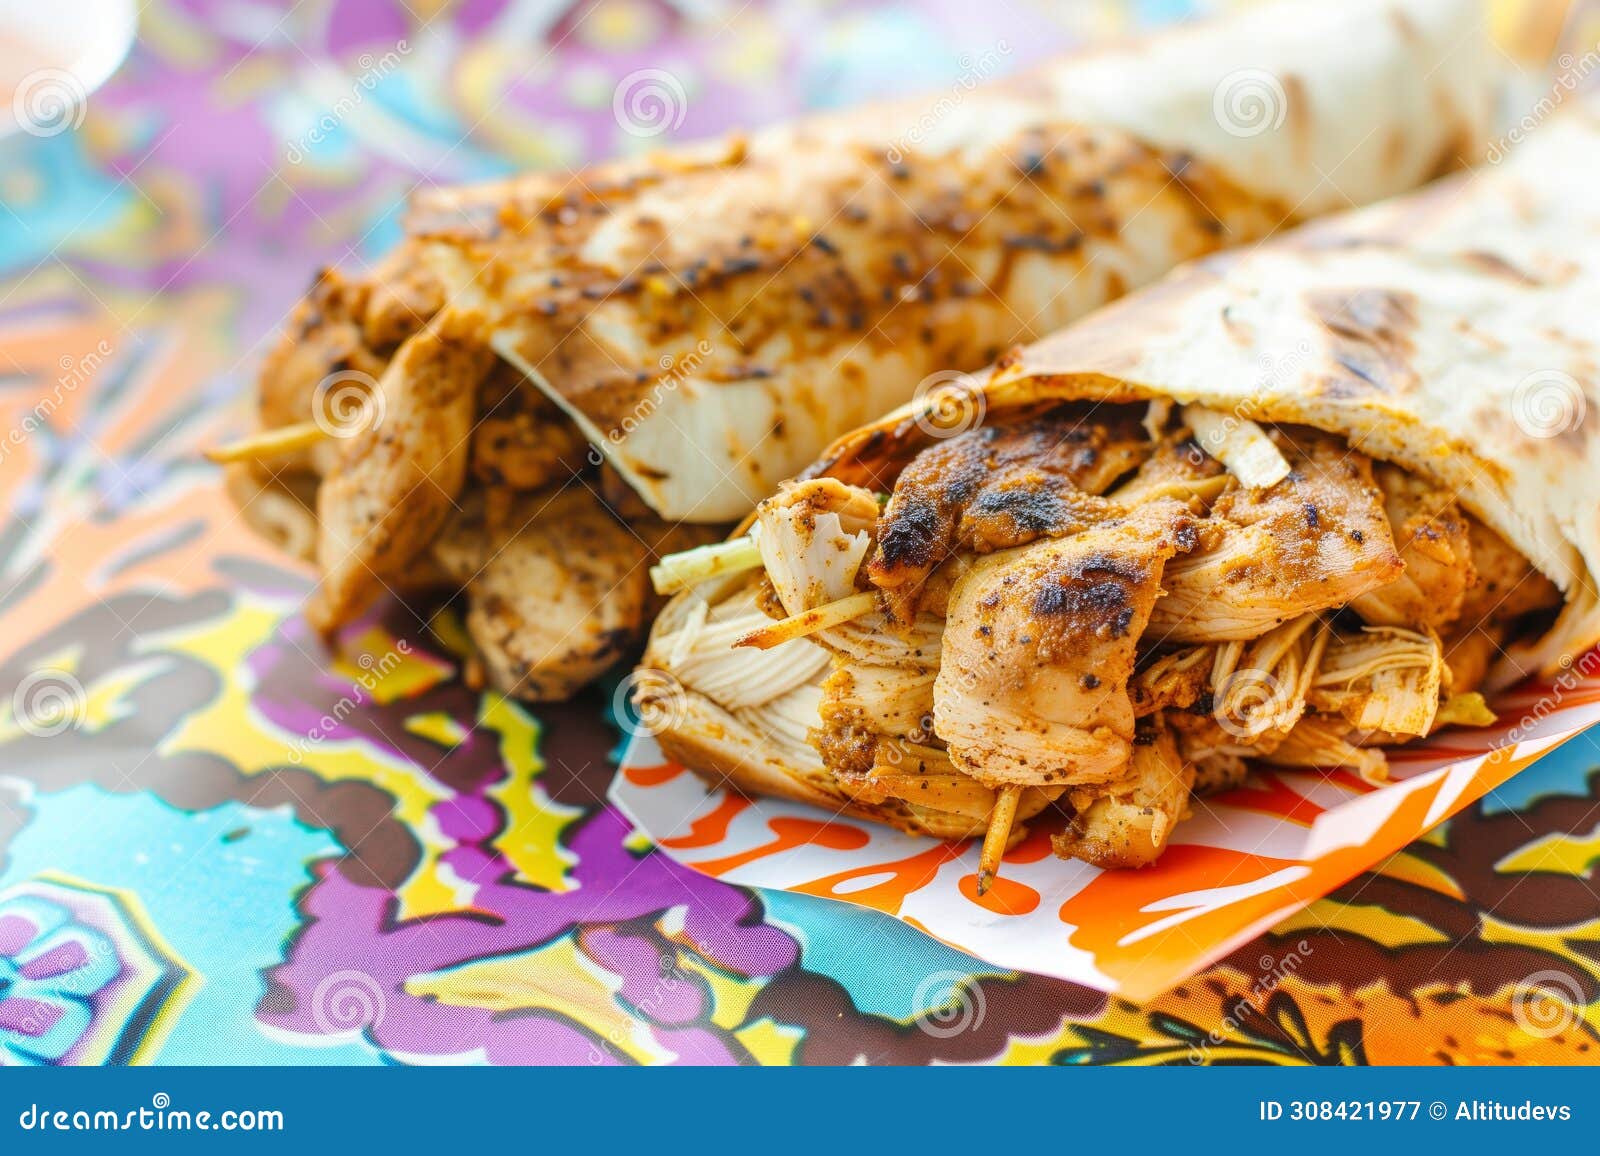 chicken shawarma readytoeat on a colorful paper wrap